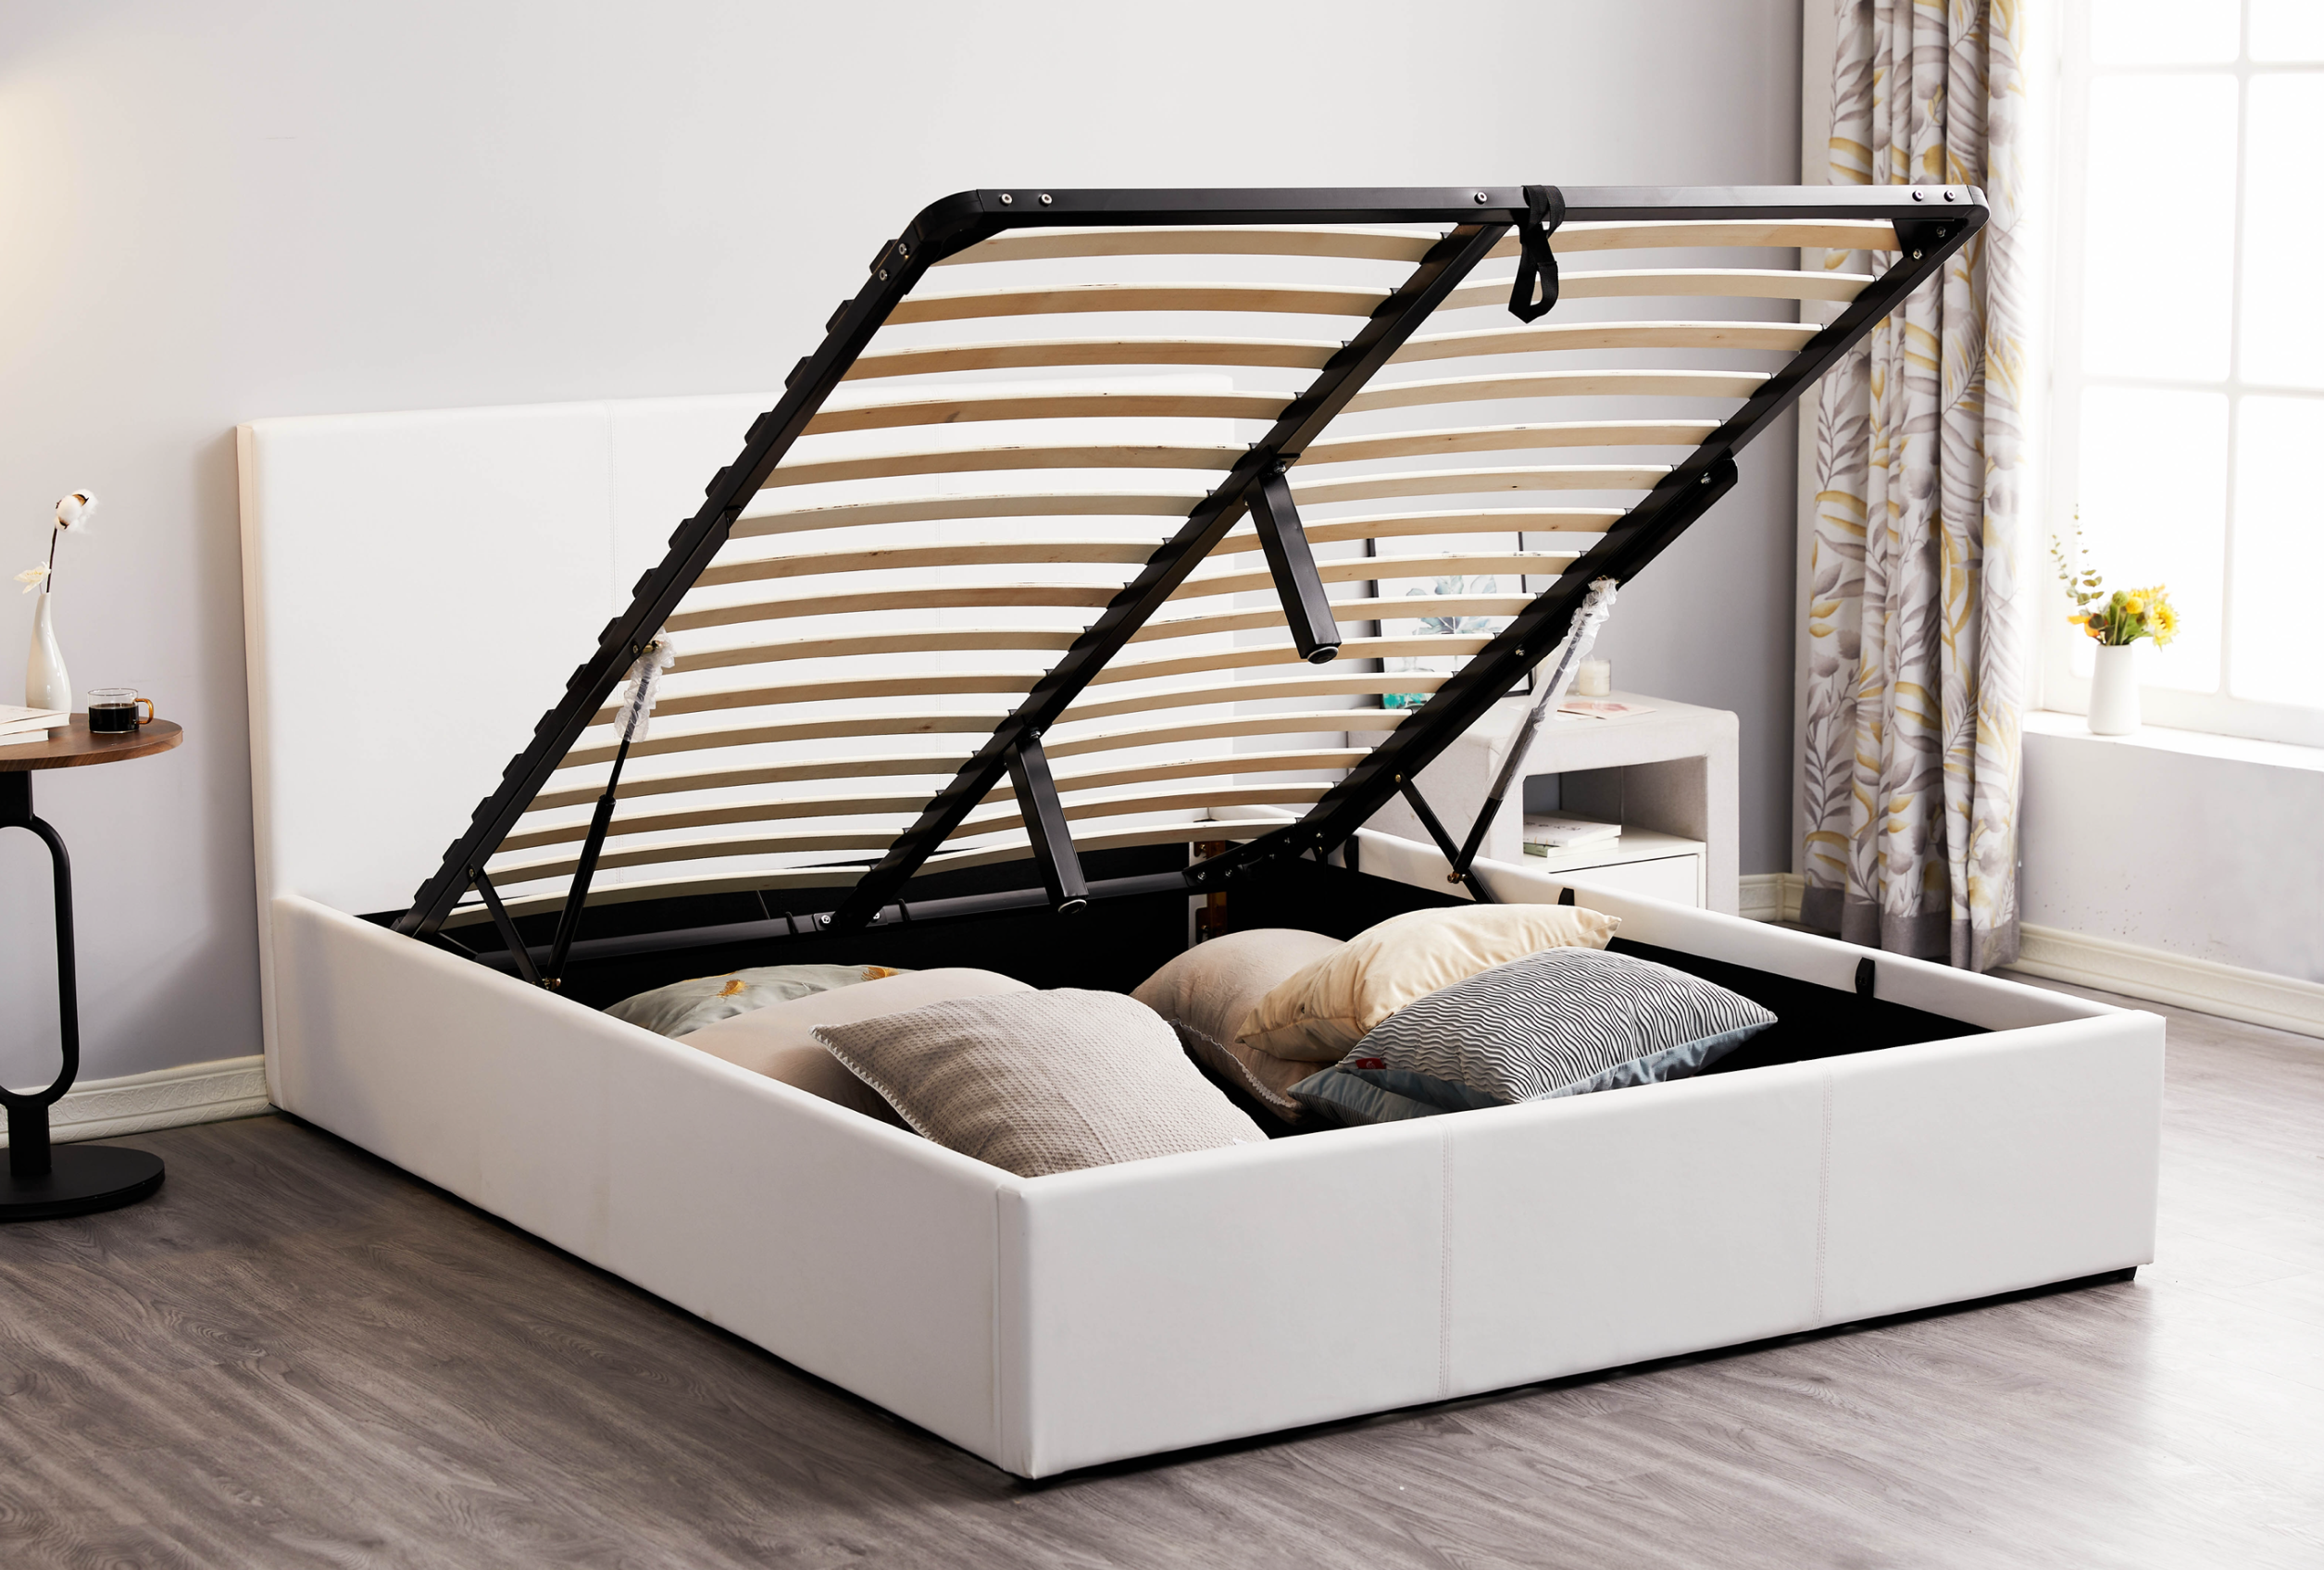 Monarch Queen Size Pu Leather Lift-up Storage Bed